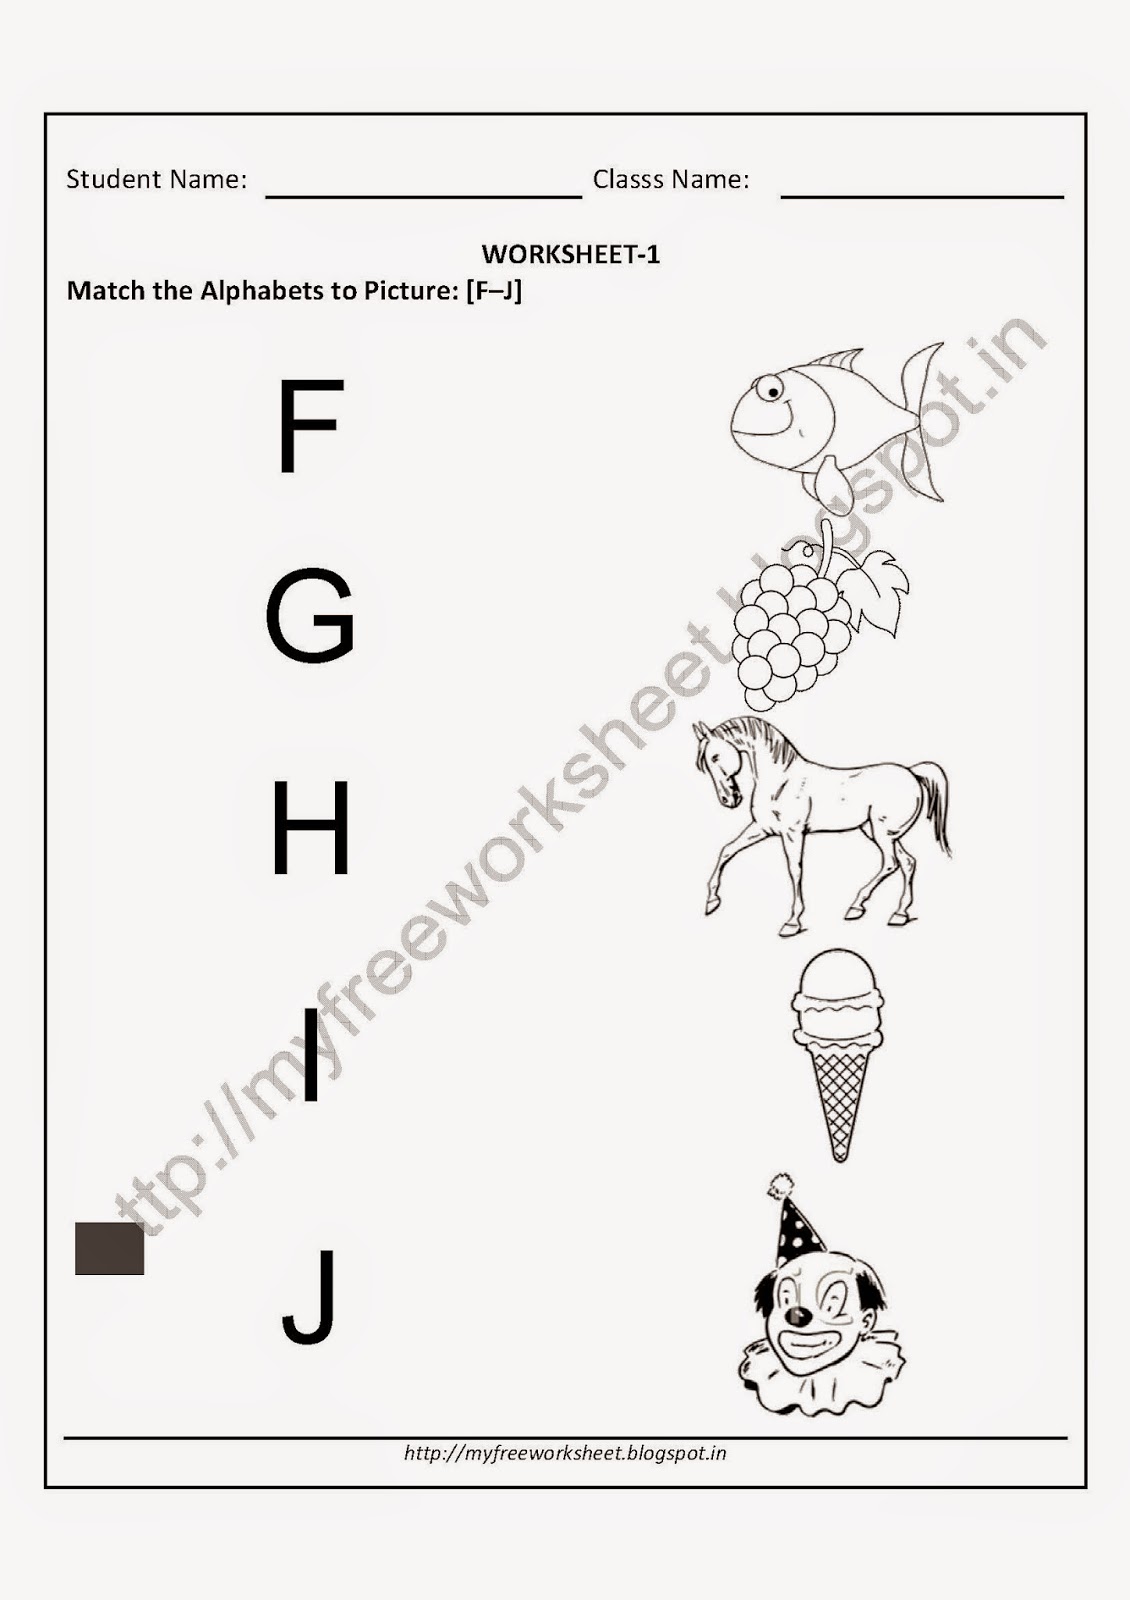 free-printable-worksheets-for-nursery-match-the-picture-to-alphabets